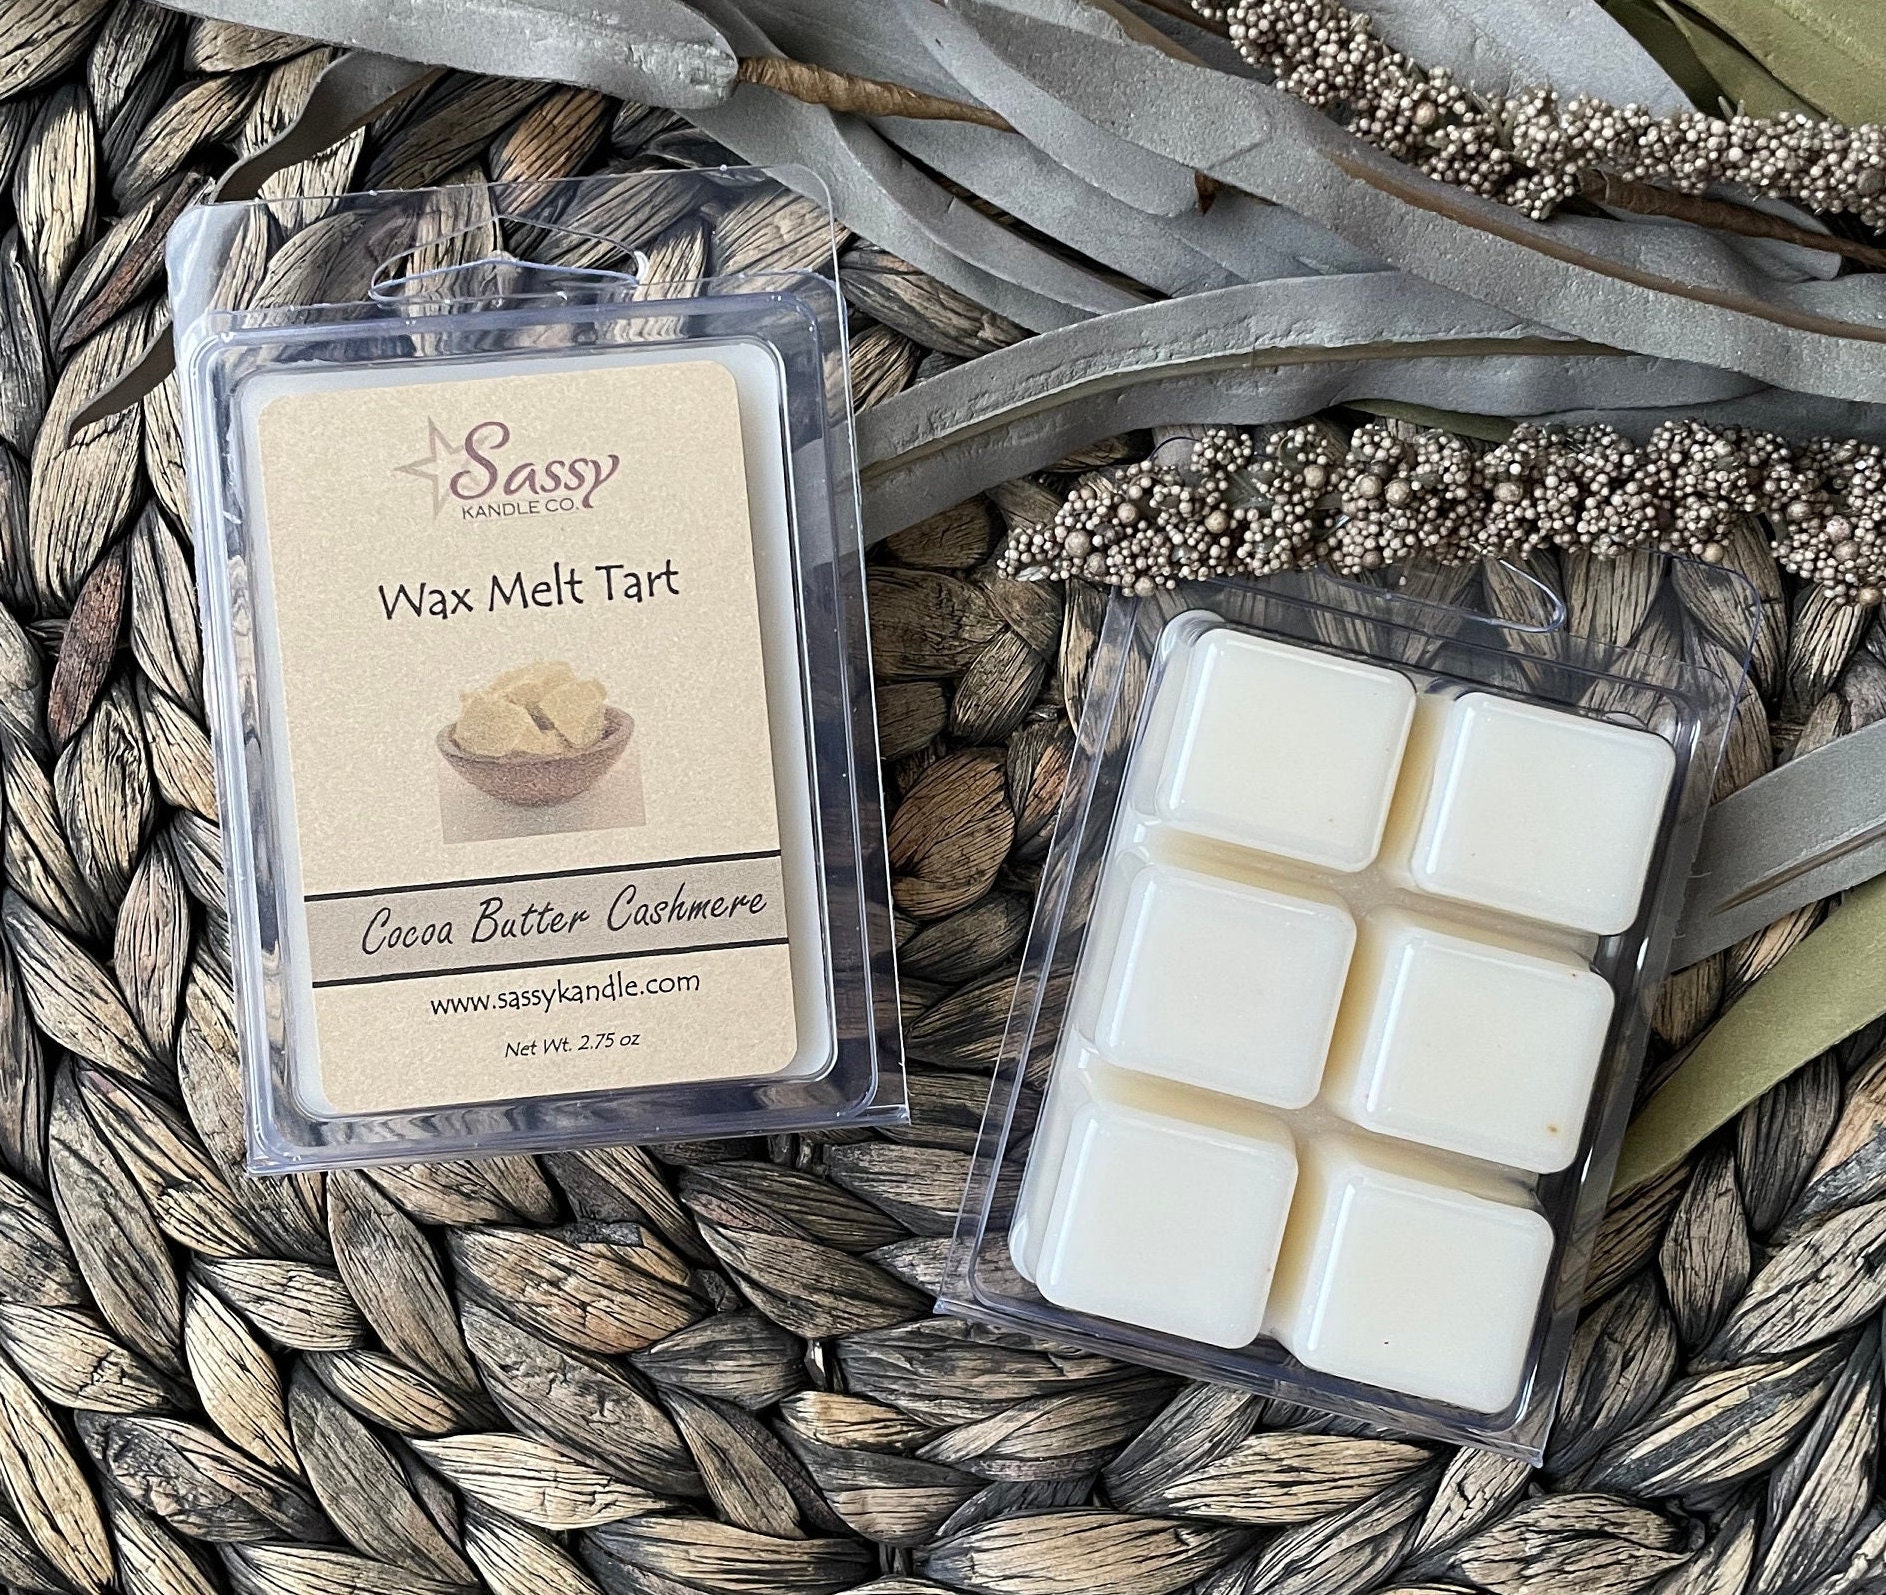 Cabin Cookies 100% Soy Wax Candle Hand Poured (Very Vanilla Scent) -  Mountain Kettle Candle Co